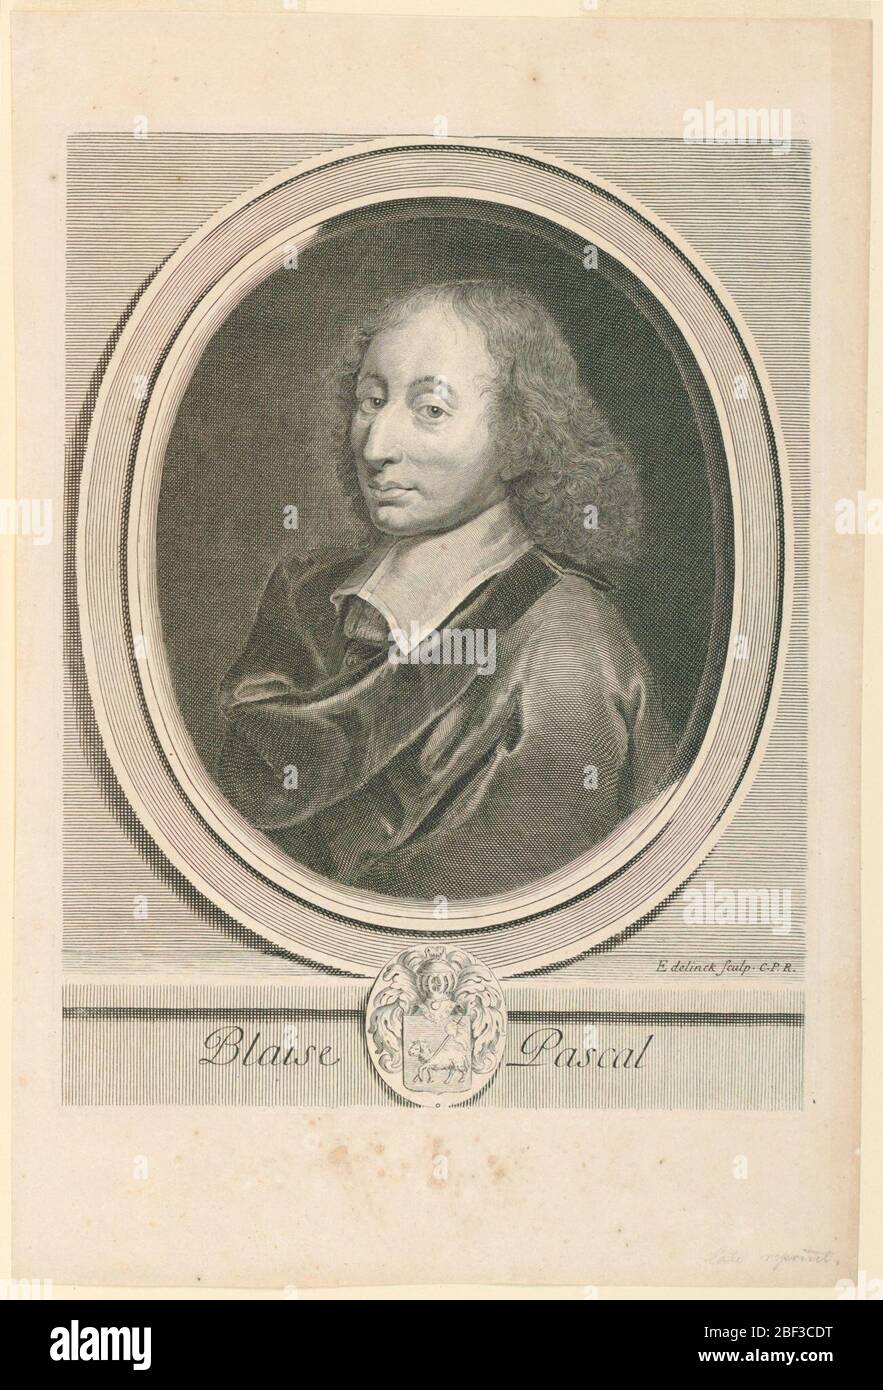 Portrait of Blaise Pascal 16231662. Bust length portrait in three-quarter view toward left. The sitter has his coat wrapped around him. In an oval frame with coat-of-arms in lower part. The frame stands on an inscribed moulding. Stock Photo